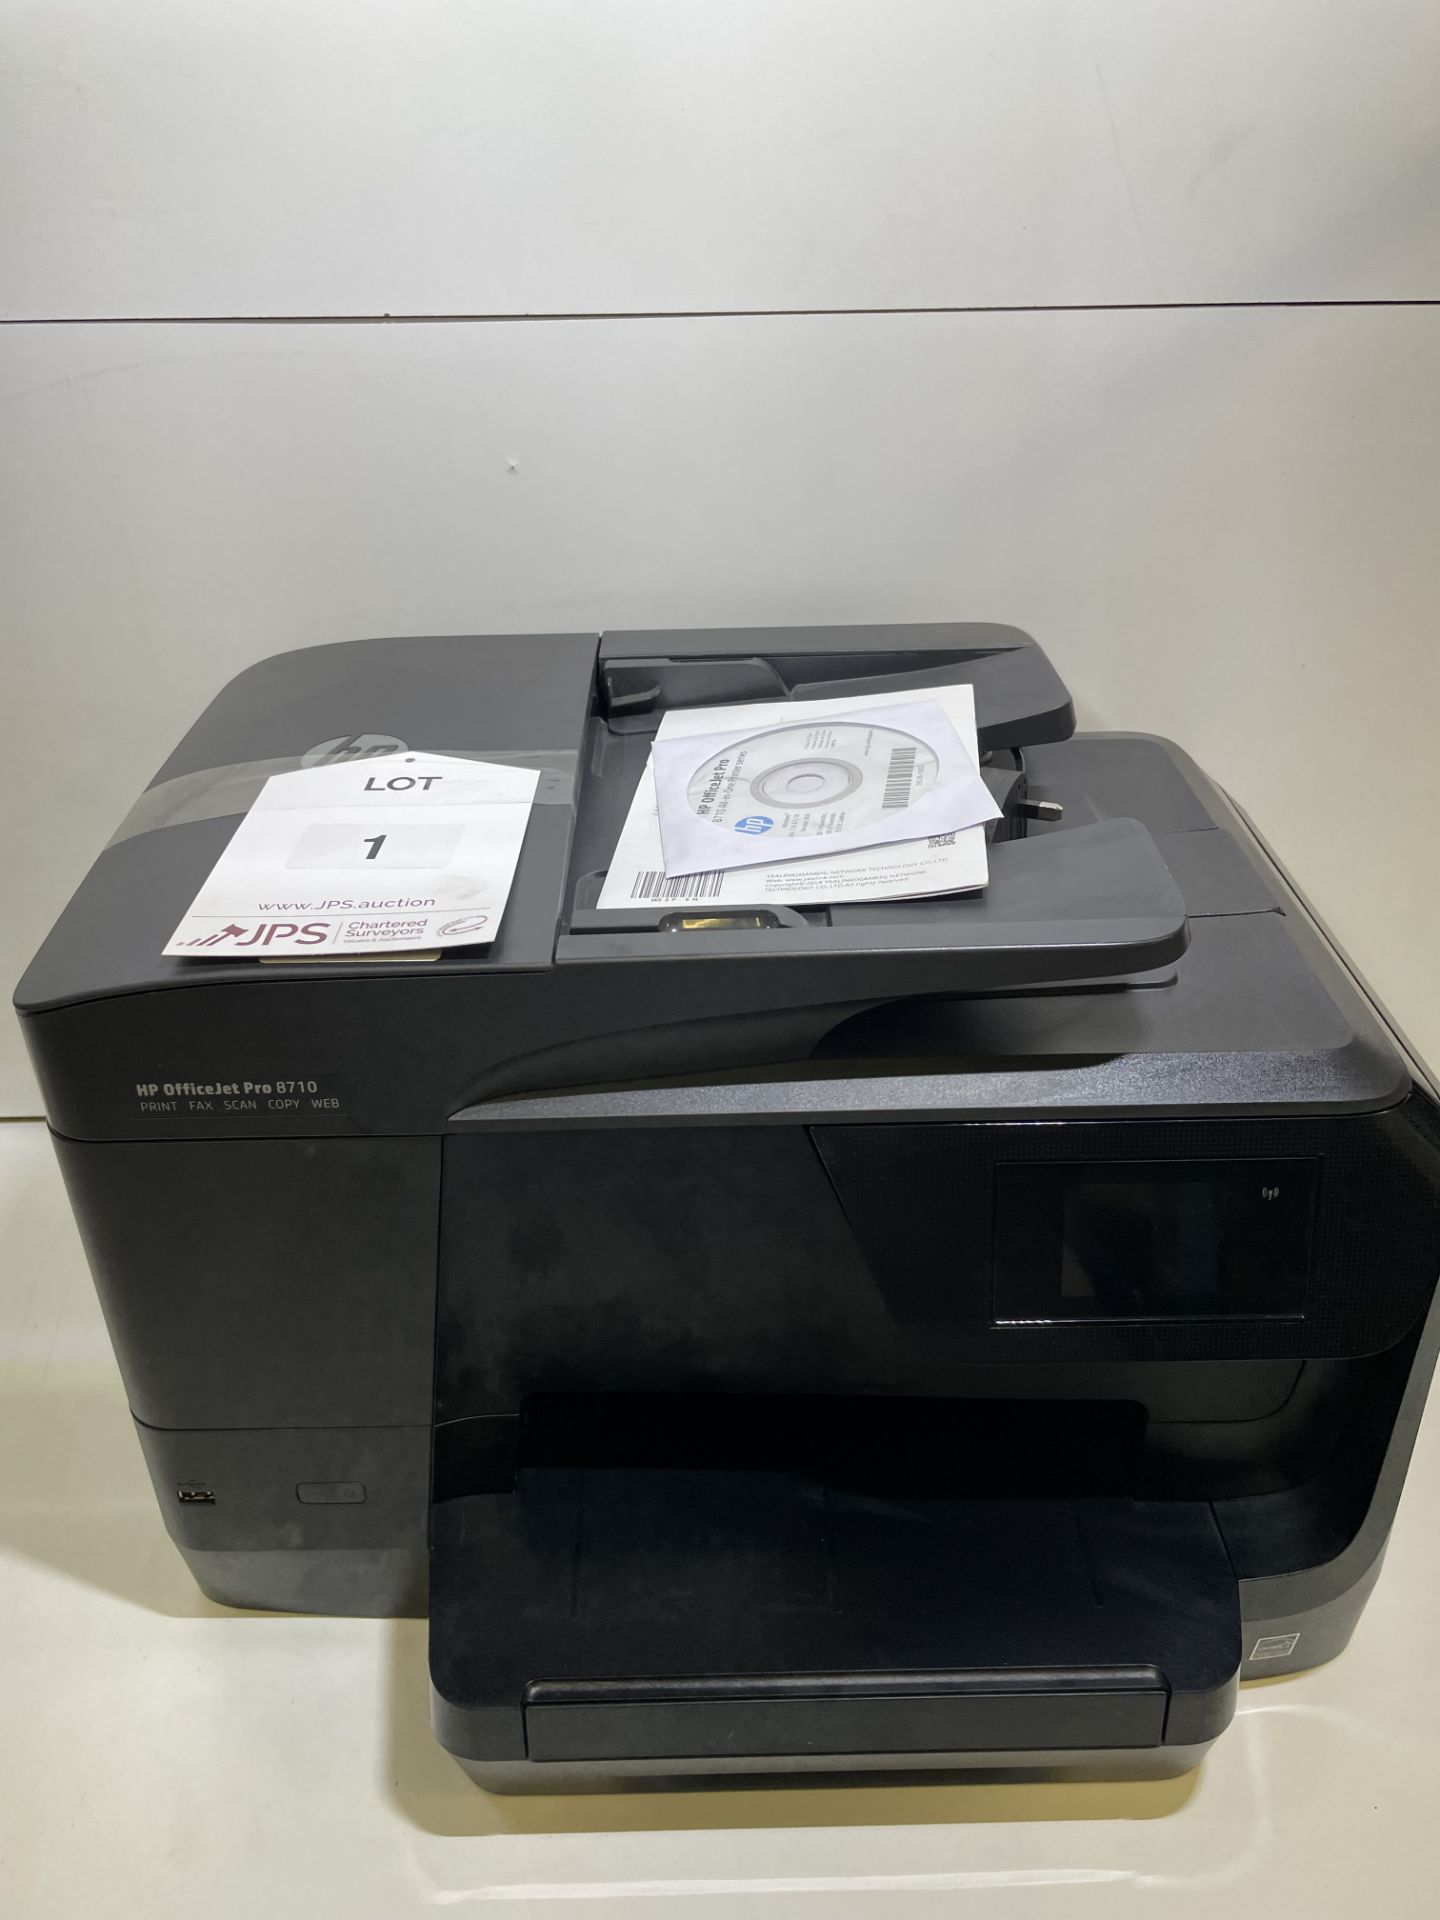 HP Officejet Pro 8710 All-in-One Printer